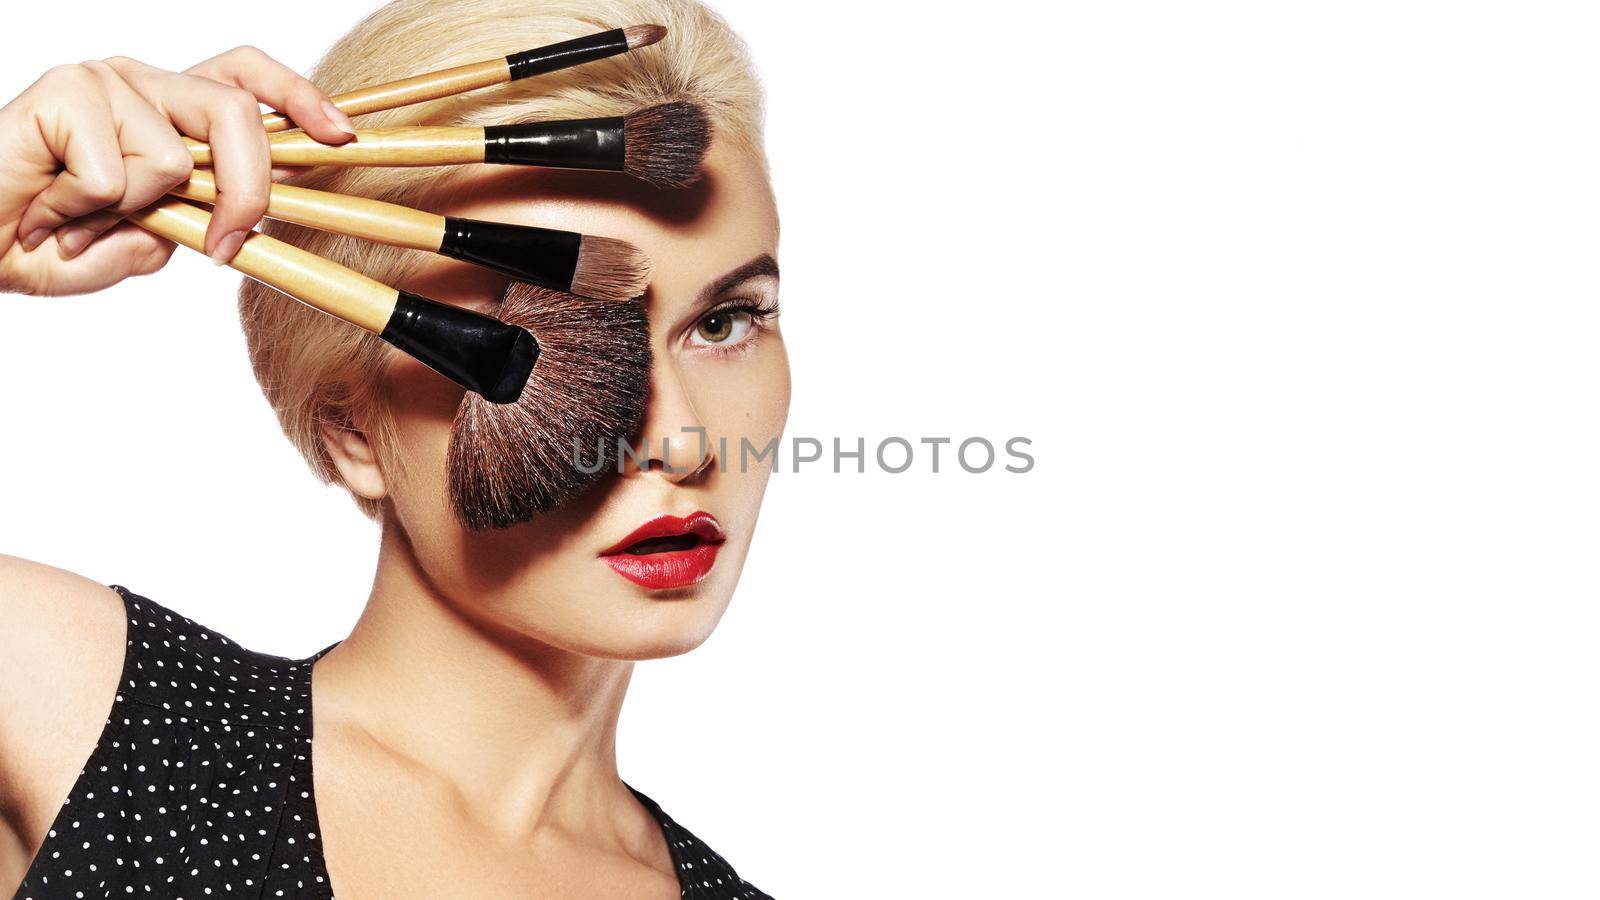 Girl with Makeup Accessories. Fashion Make-up for Sexy Woman Face. Make-up Artist Applying Brushes on white background with Copyspace. Retro Style Woman with Red Lips